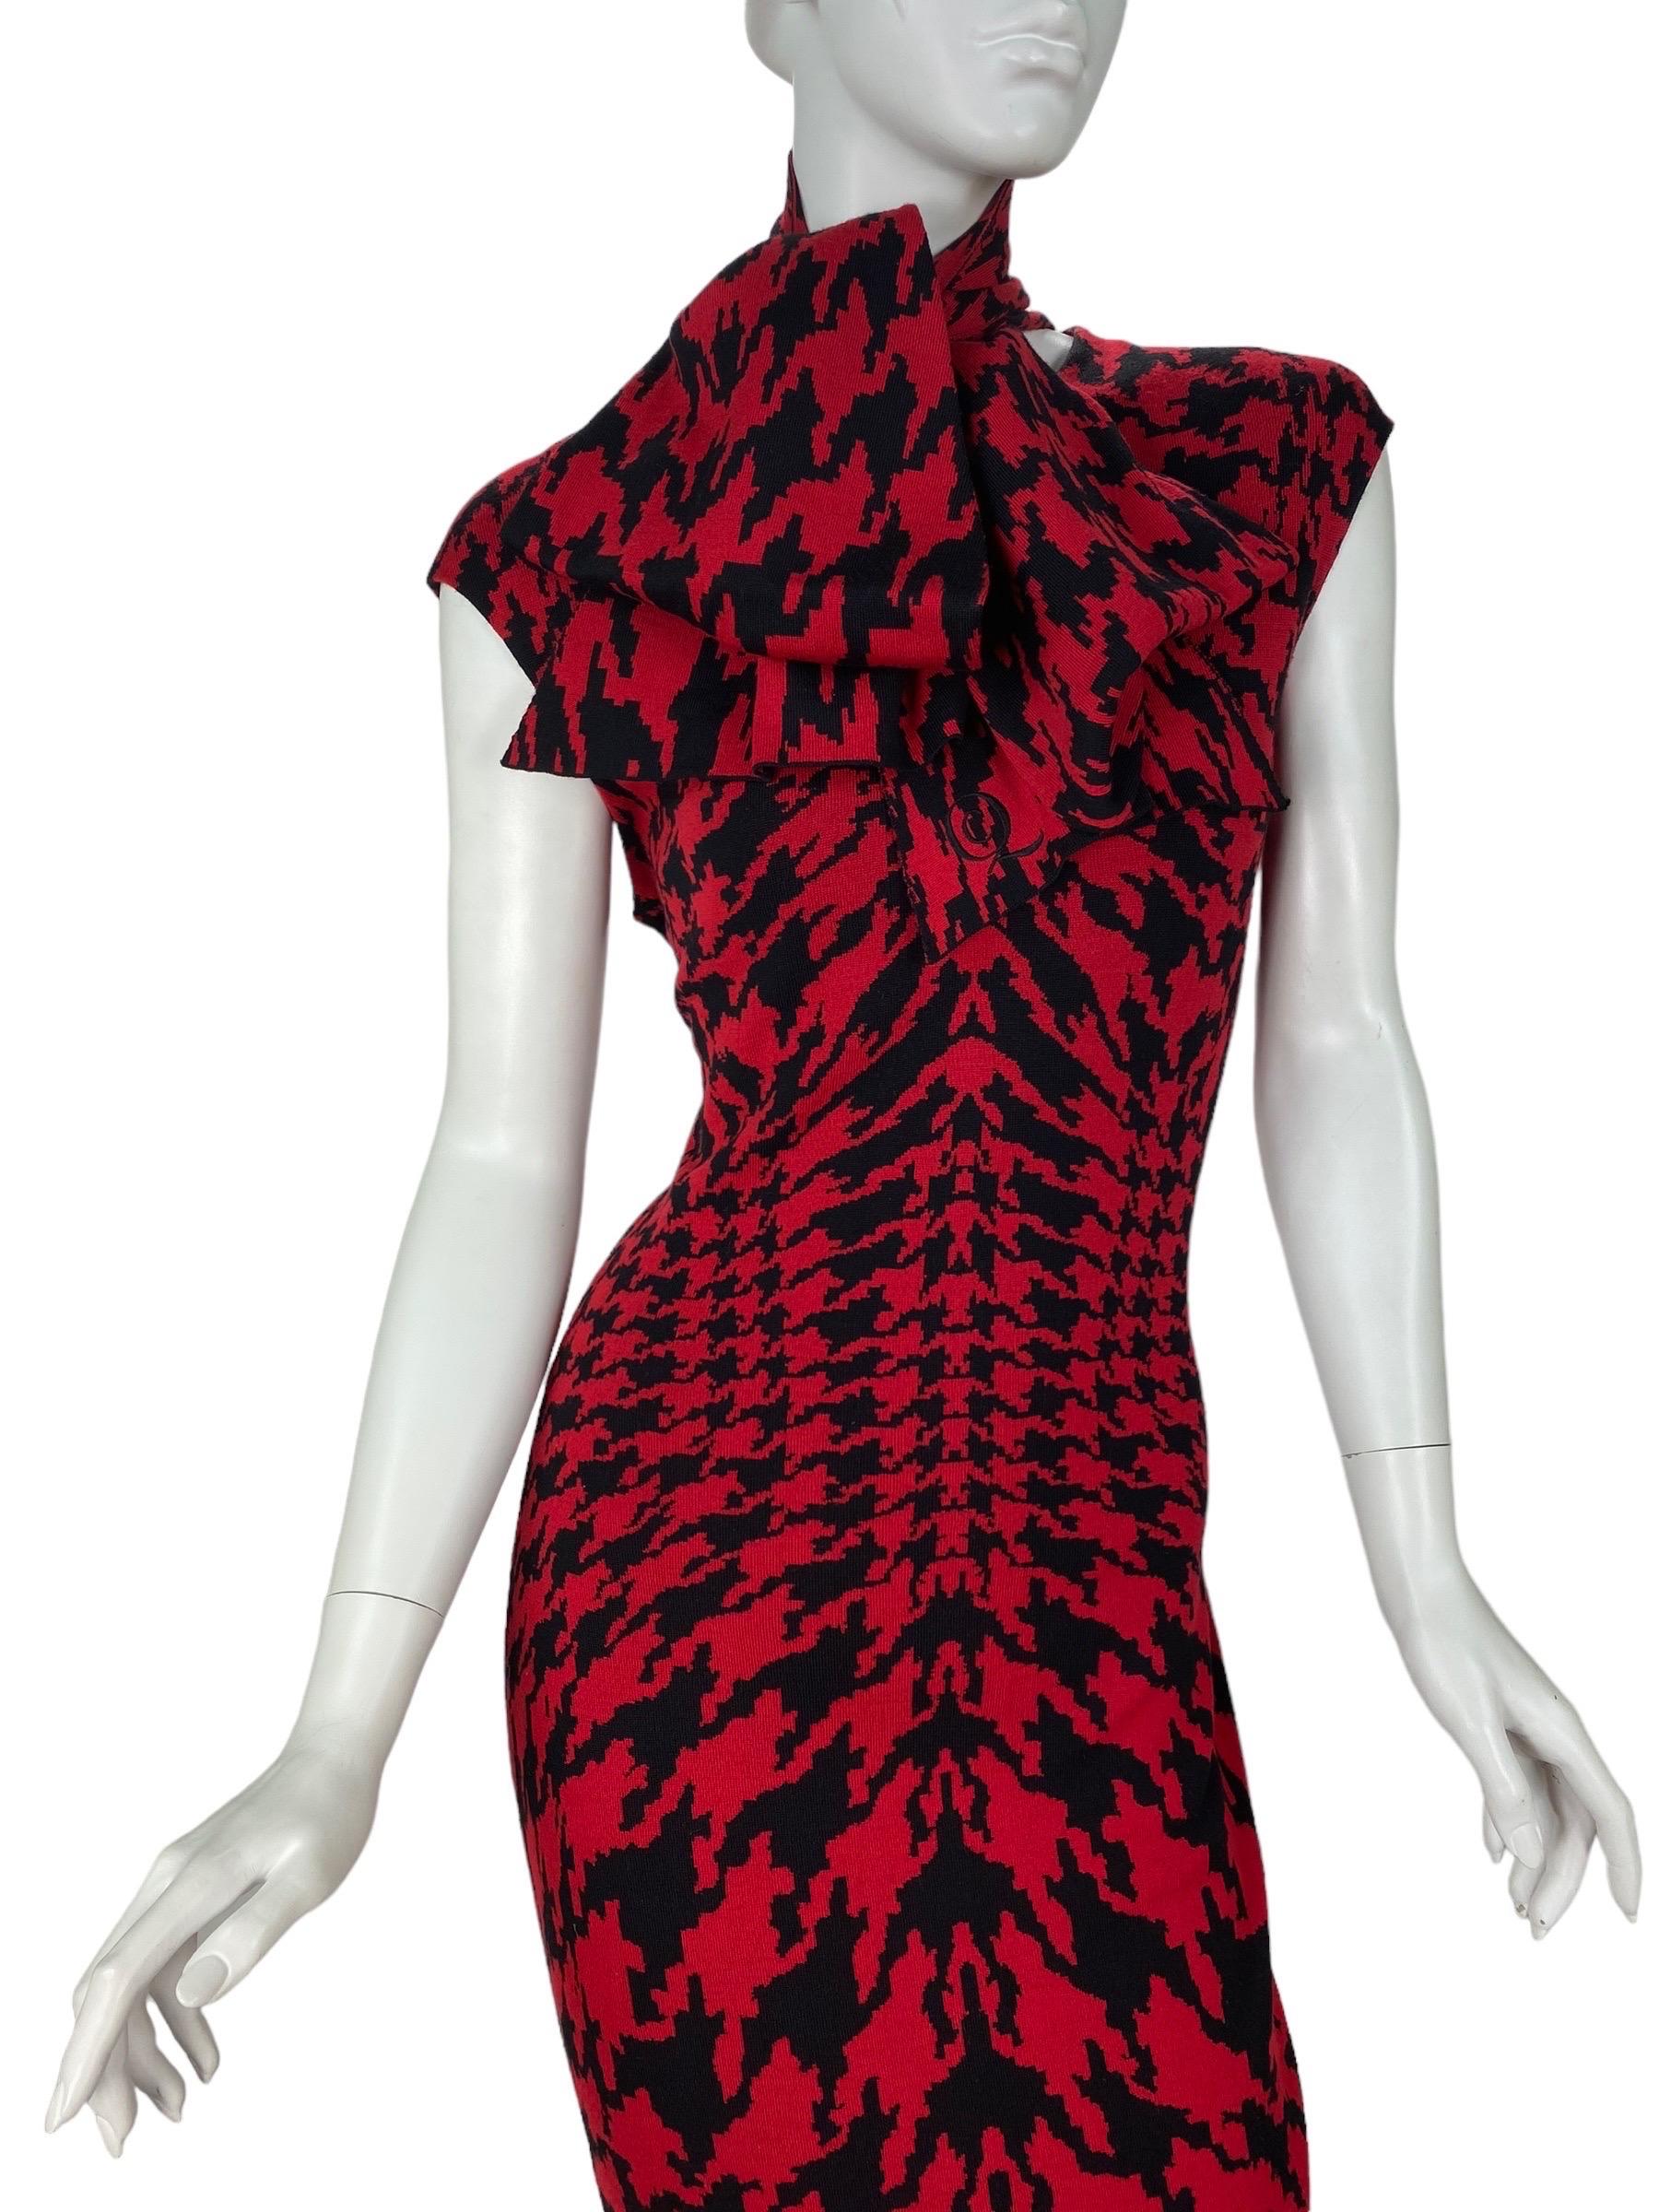 F/W 2009 Iconic Alexander Mcqueen houndstooth print knit dress  In Excellent Condition For Sale In Montgomery, TX